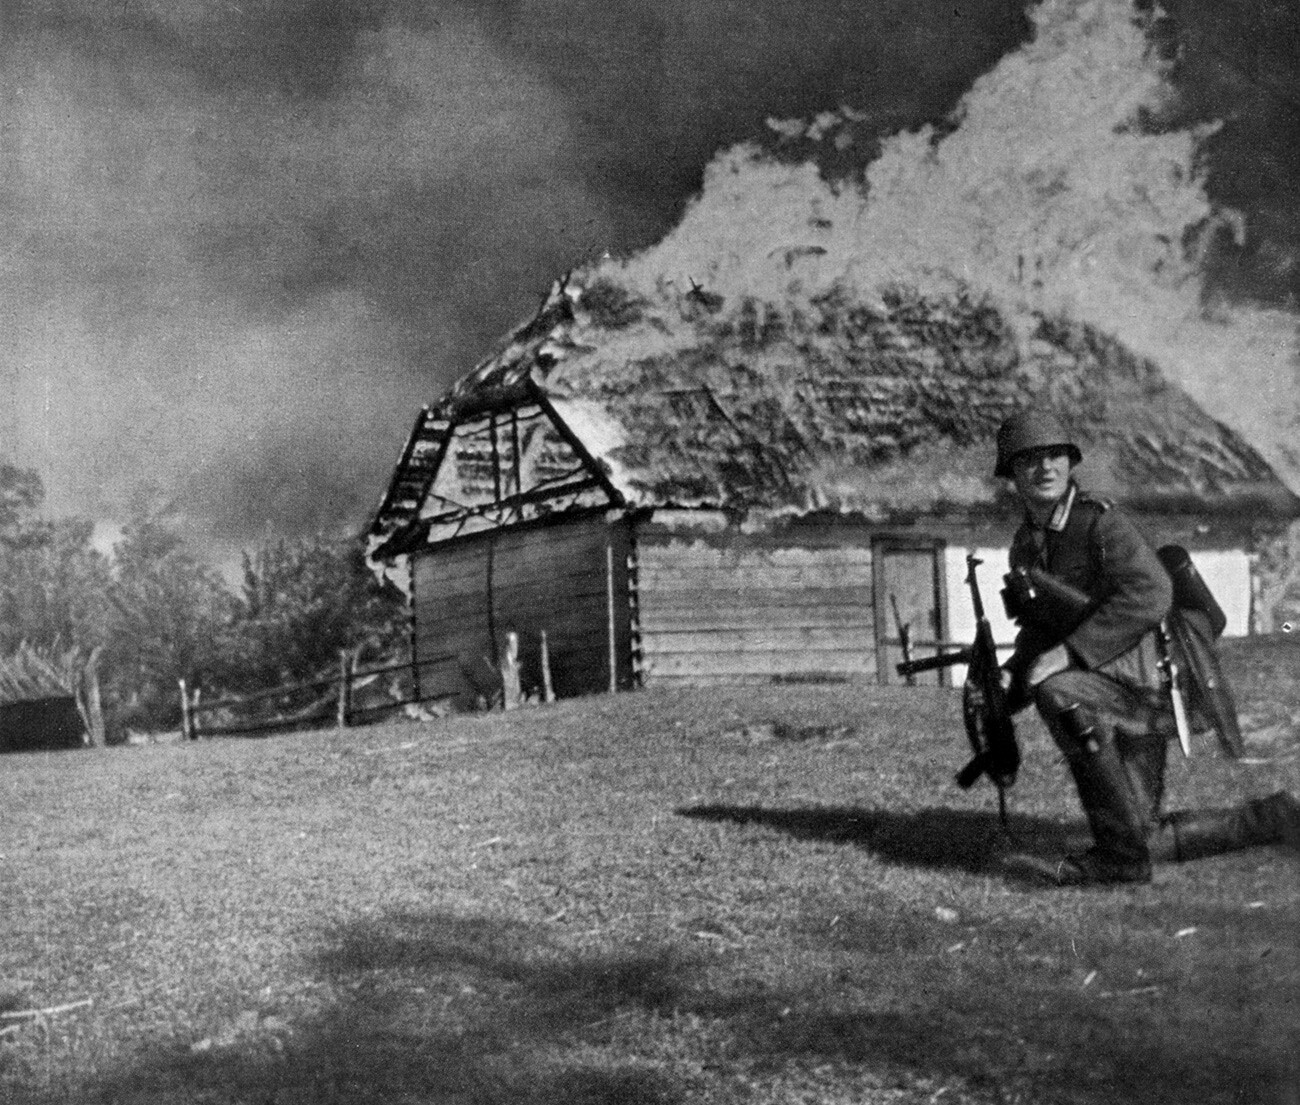 German soldiers fighting in the Soviet Union.